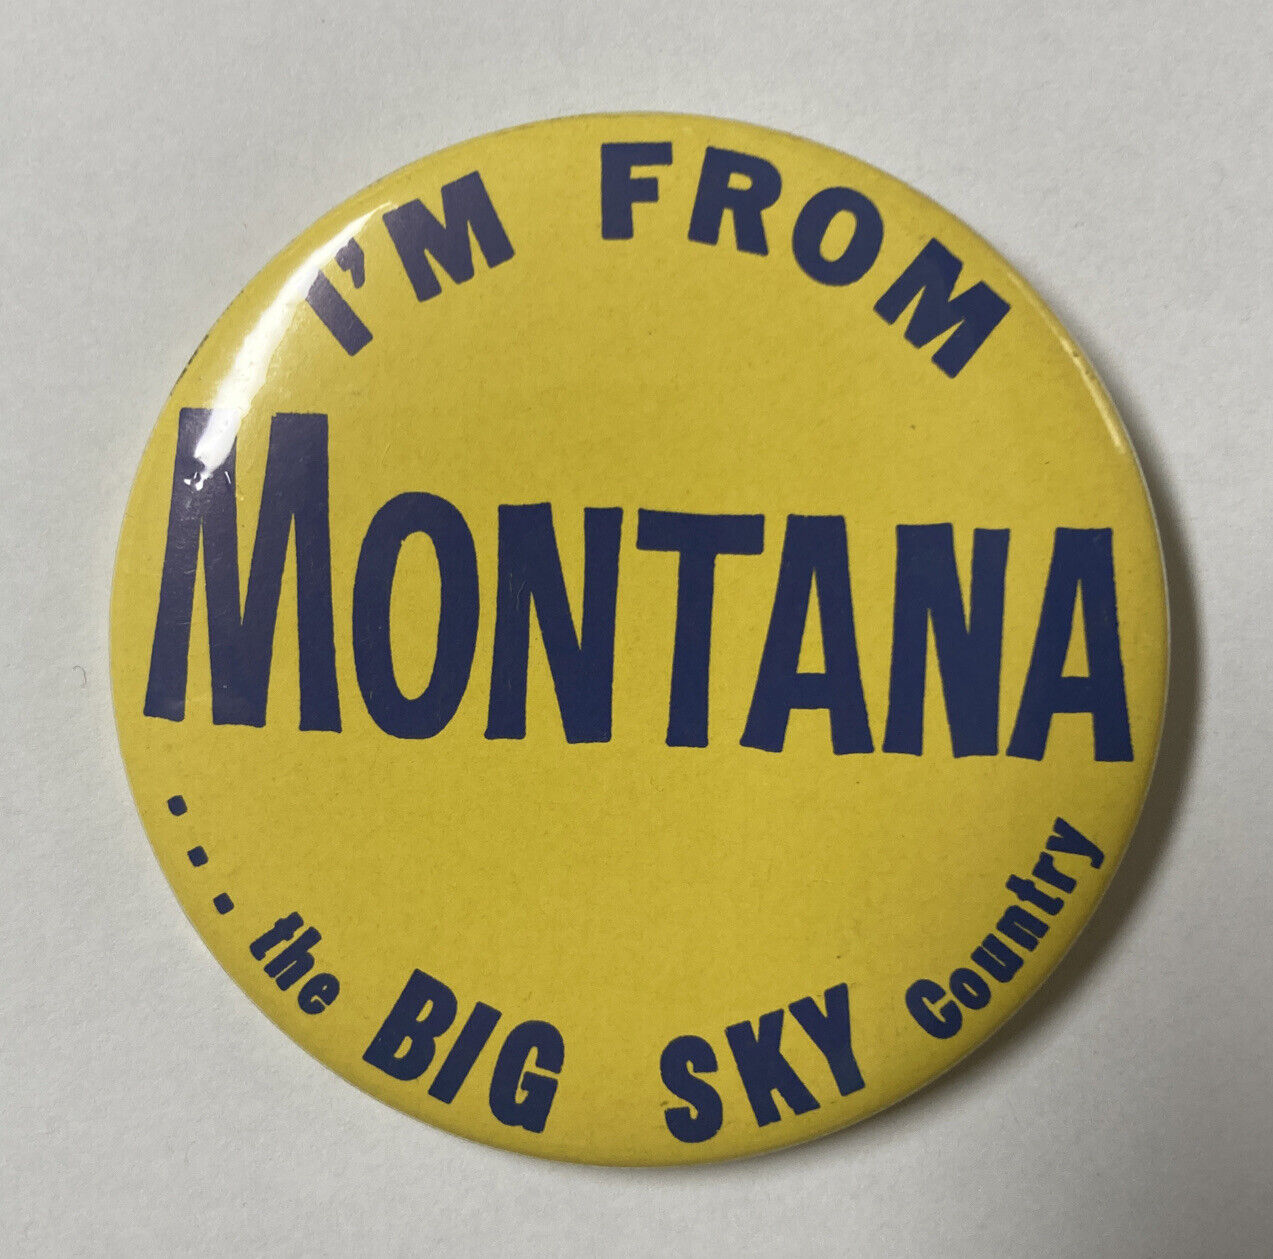 Collectible I’M FROM MONTANA the BIG SKY Country 3” Button Pinback Vintage